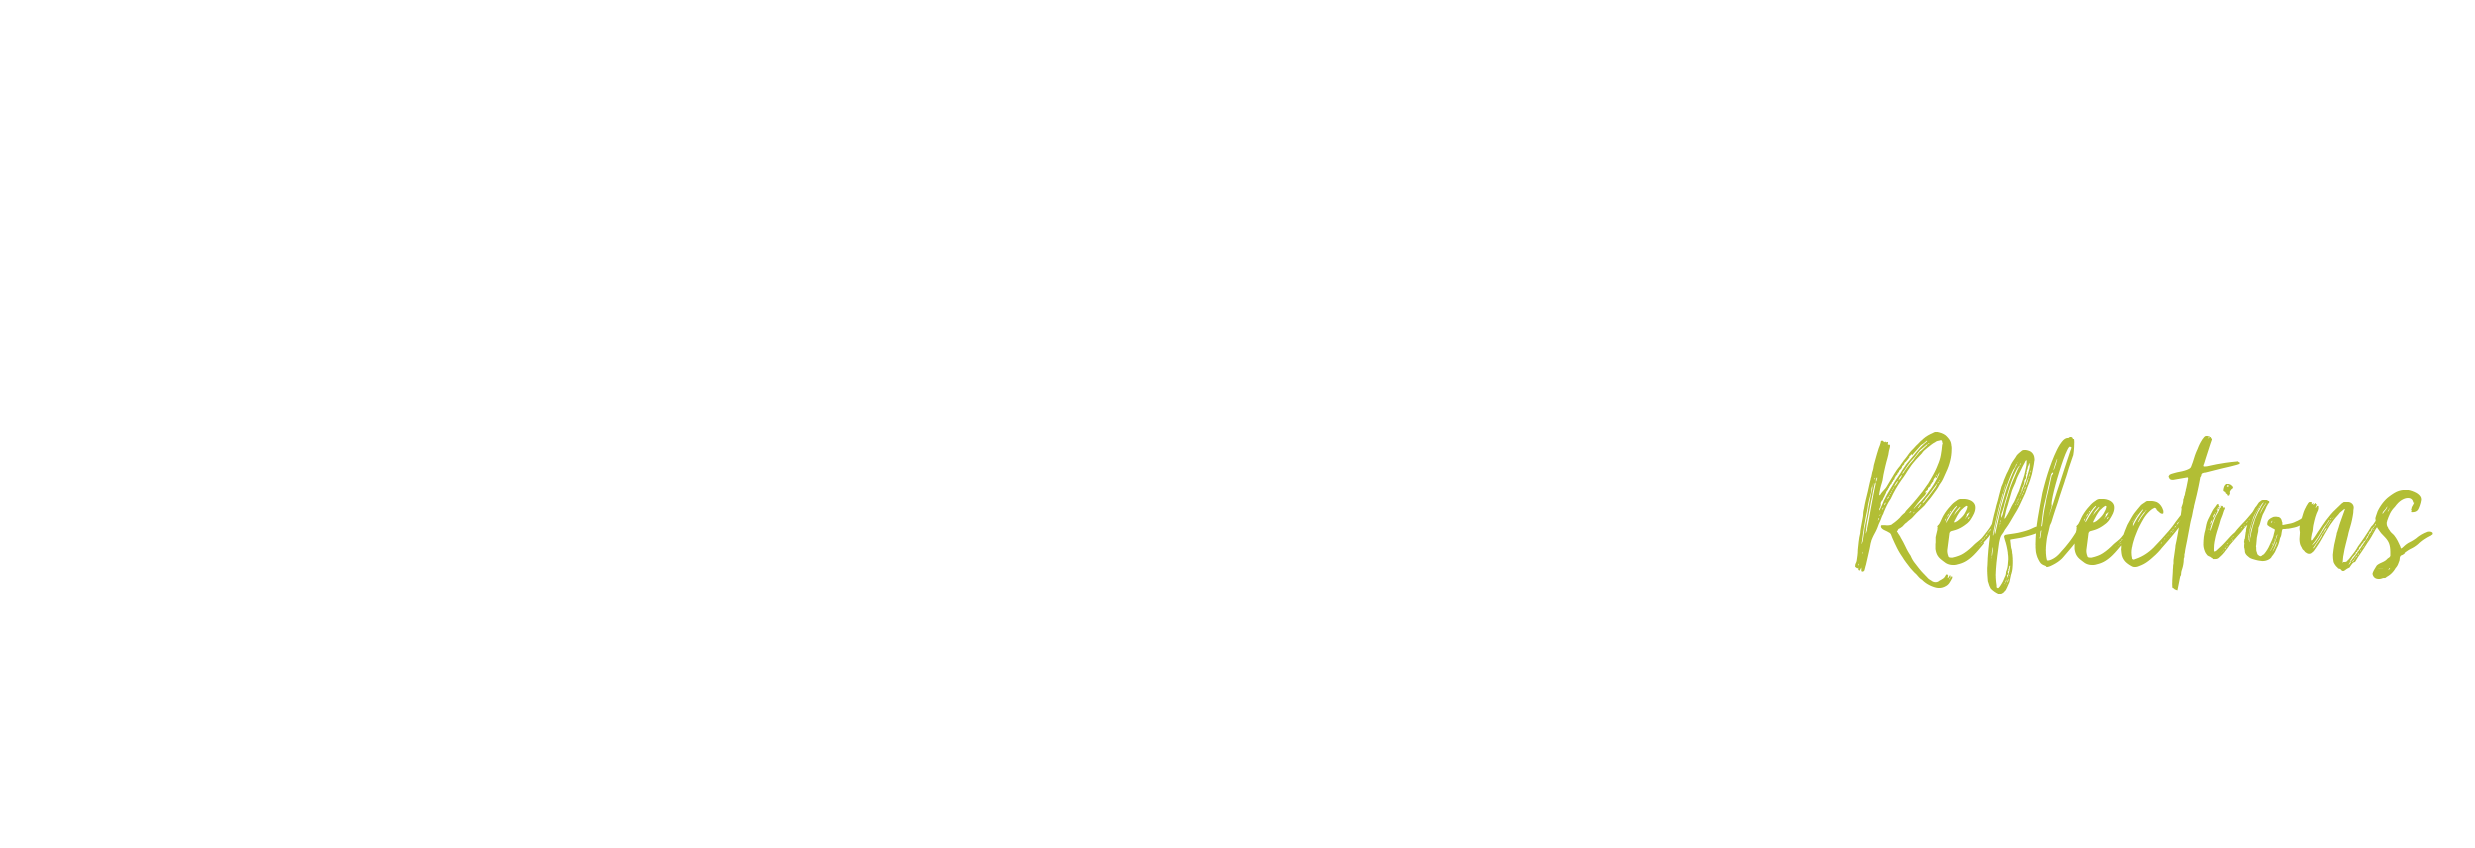 Reflections | Kent Anderson, CEO of Ohio’s Hospice, and Tom Mann, Chairman of the Board of Directors of Ohio’s Hospice, reflect on our mission and serving our communities.